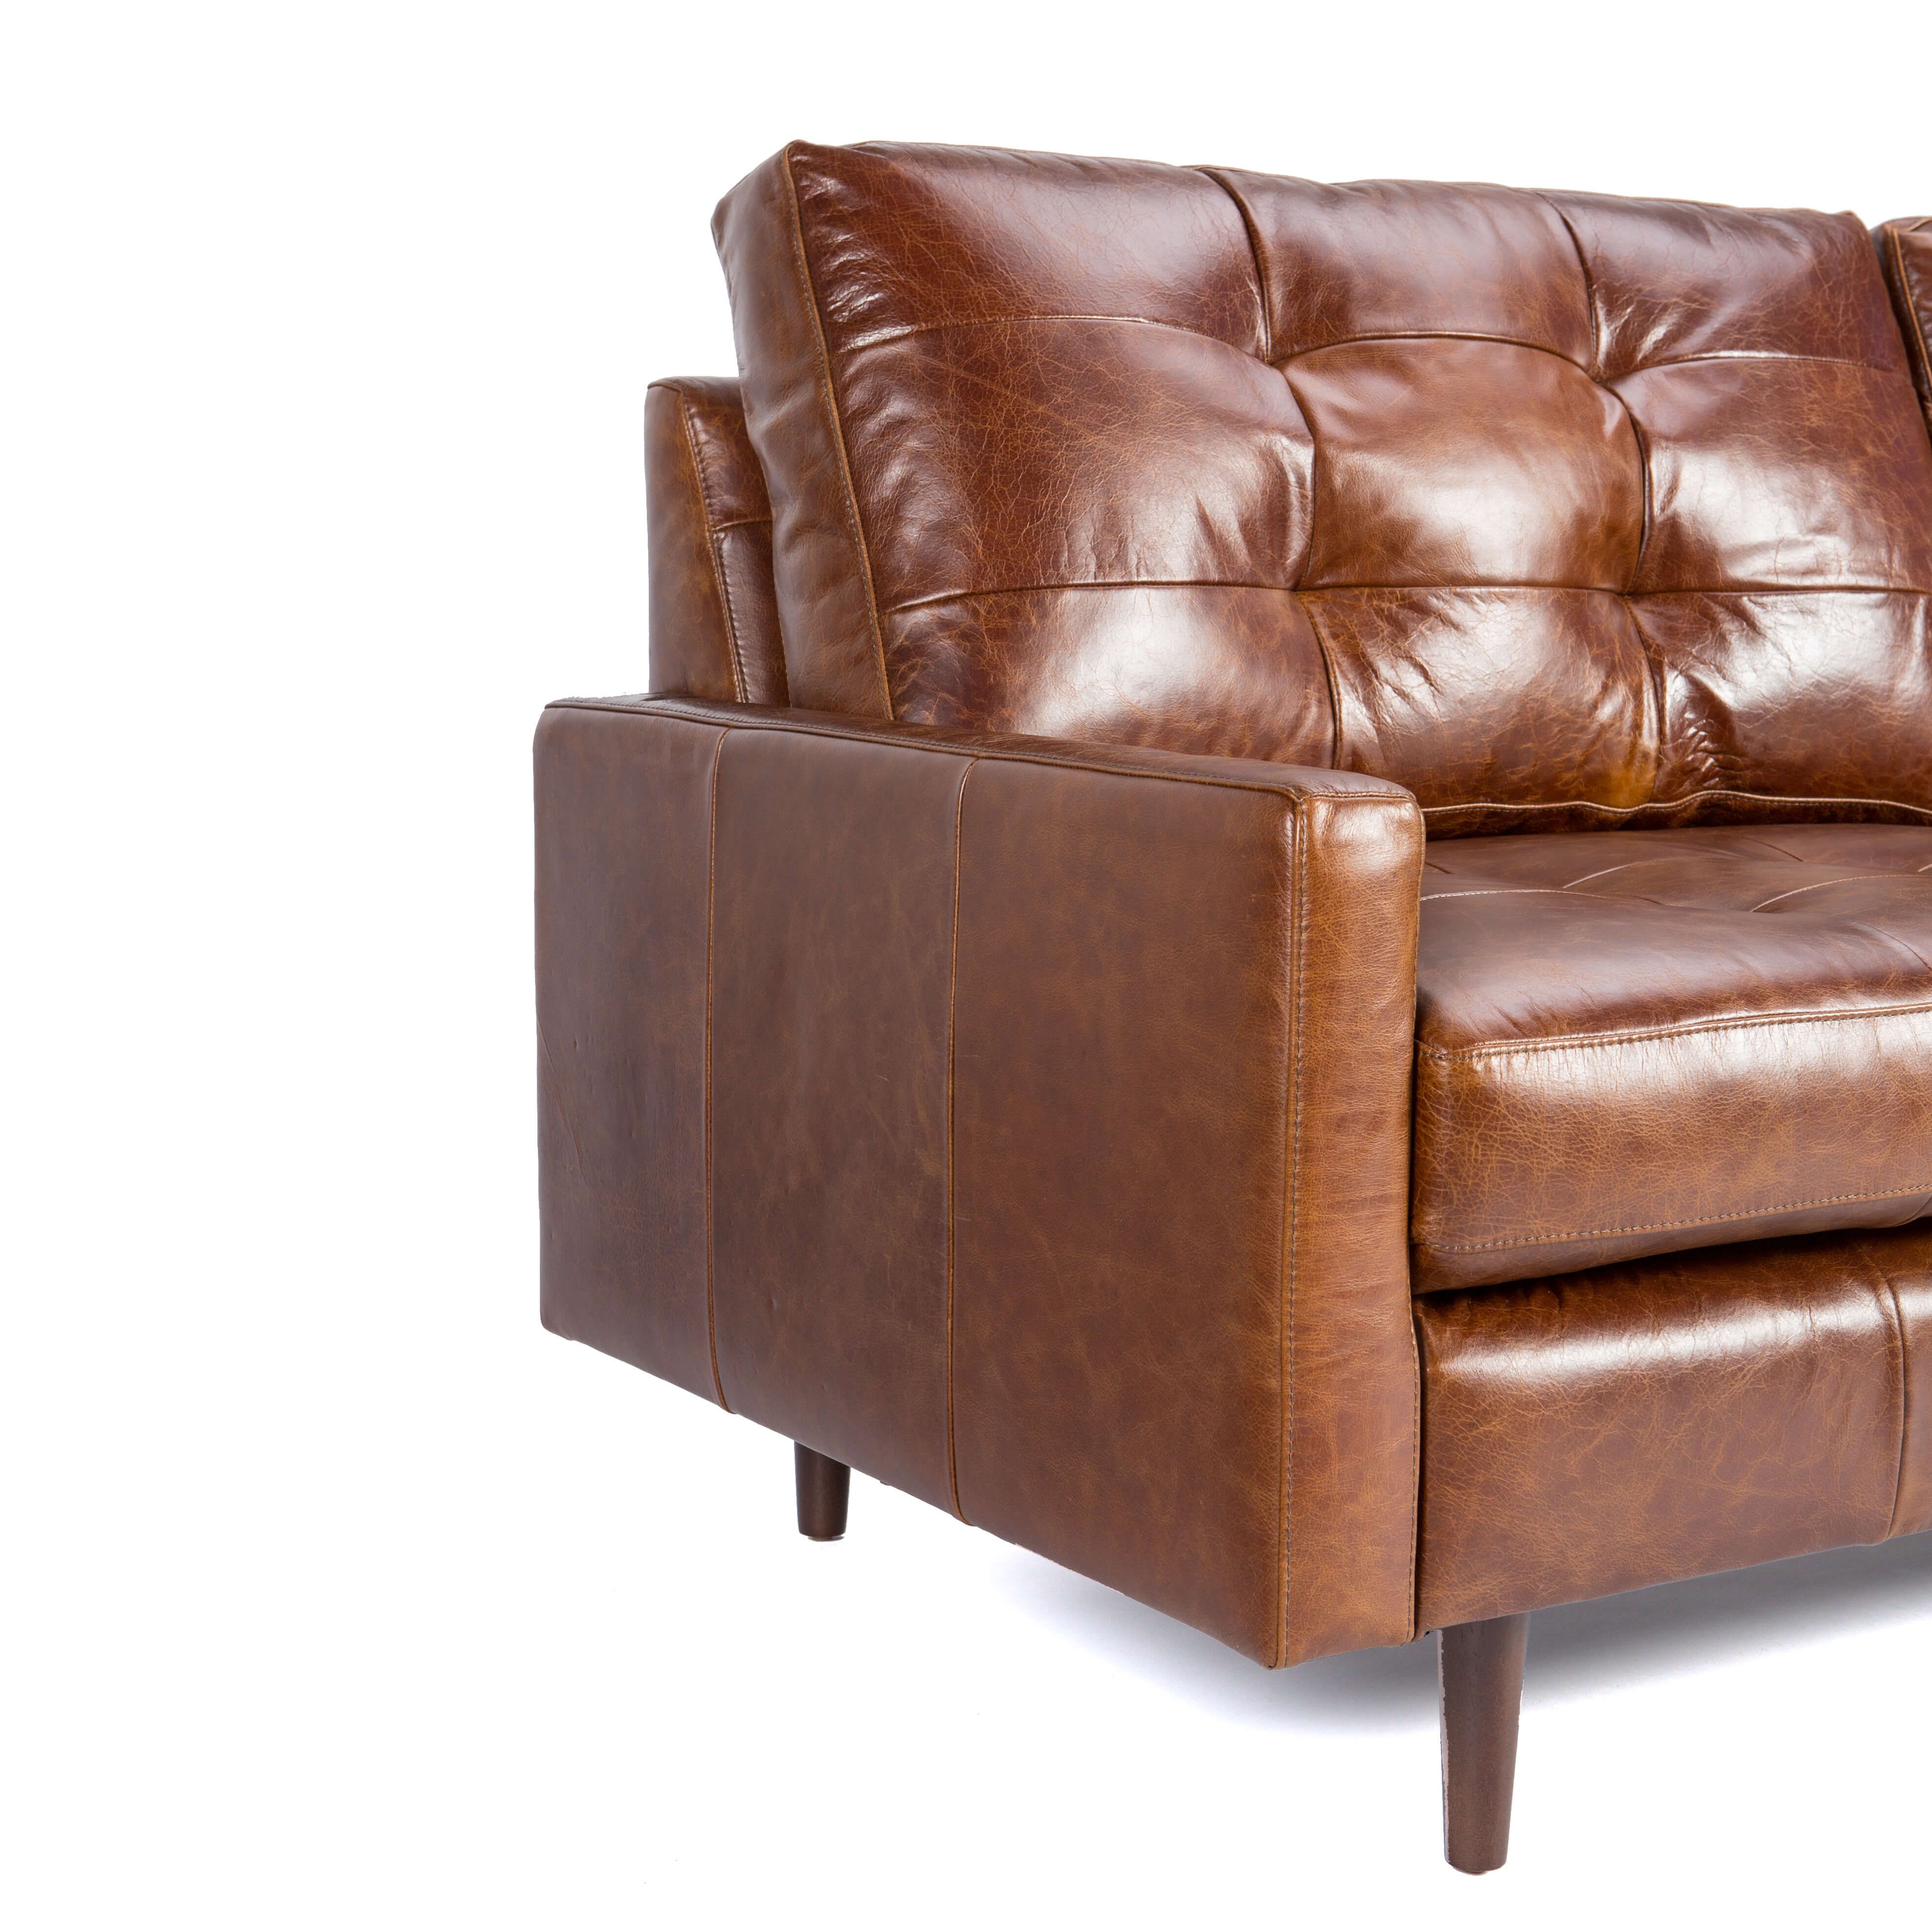 Leather Sofa With Tufted Back Cushion – Andrew – Zillo + Hutch In Andrew Leather Sofa Chairs (View 7 of 20)